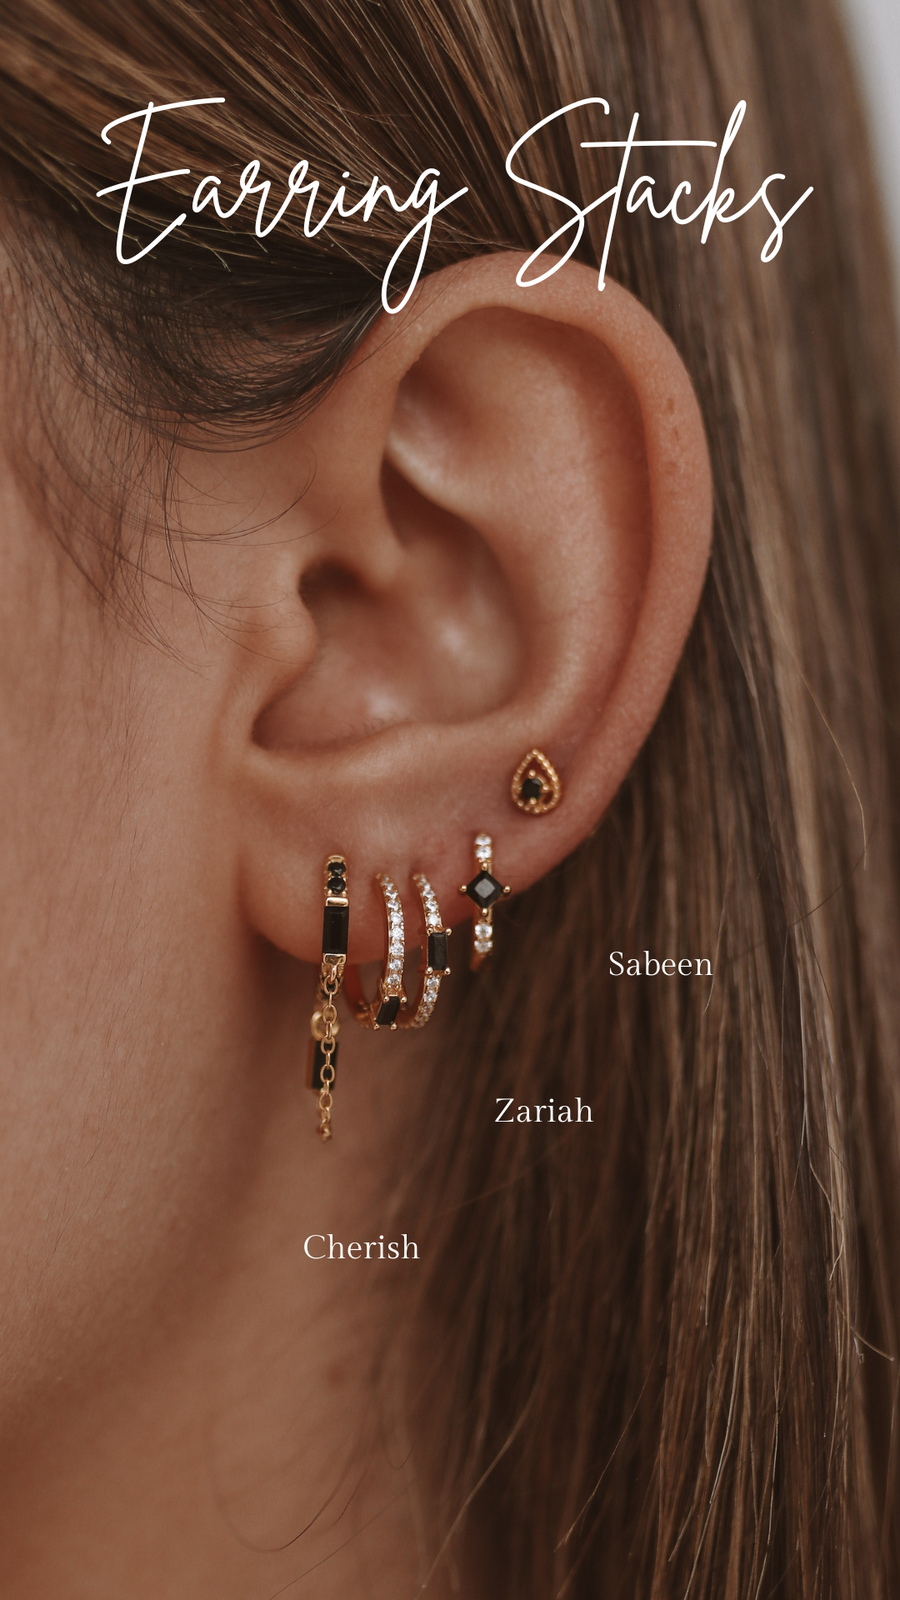 Cherish Earring Stack - Gold or Silver Sterling Silver Hoops